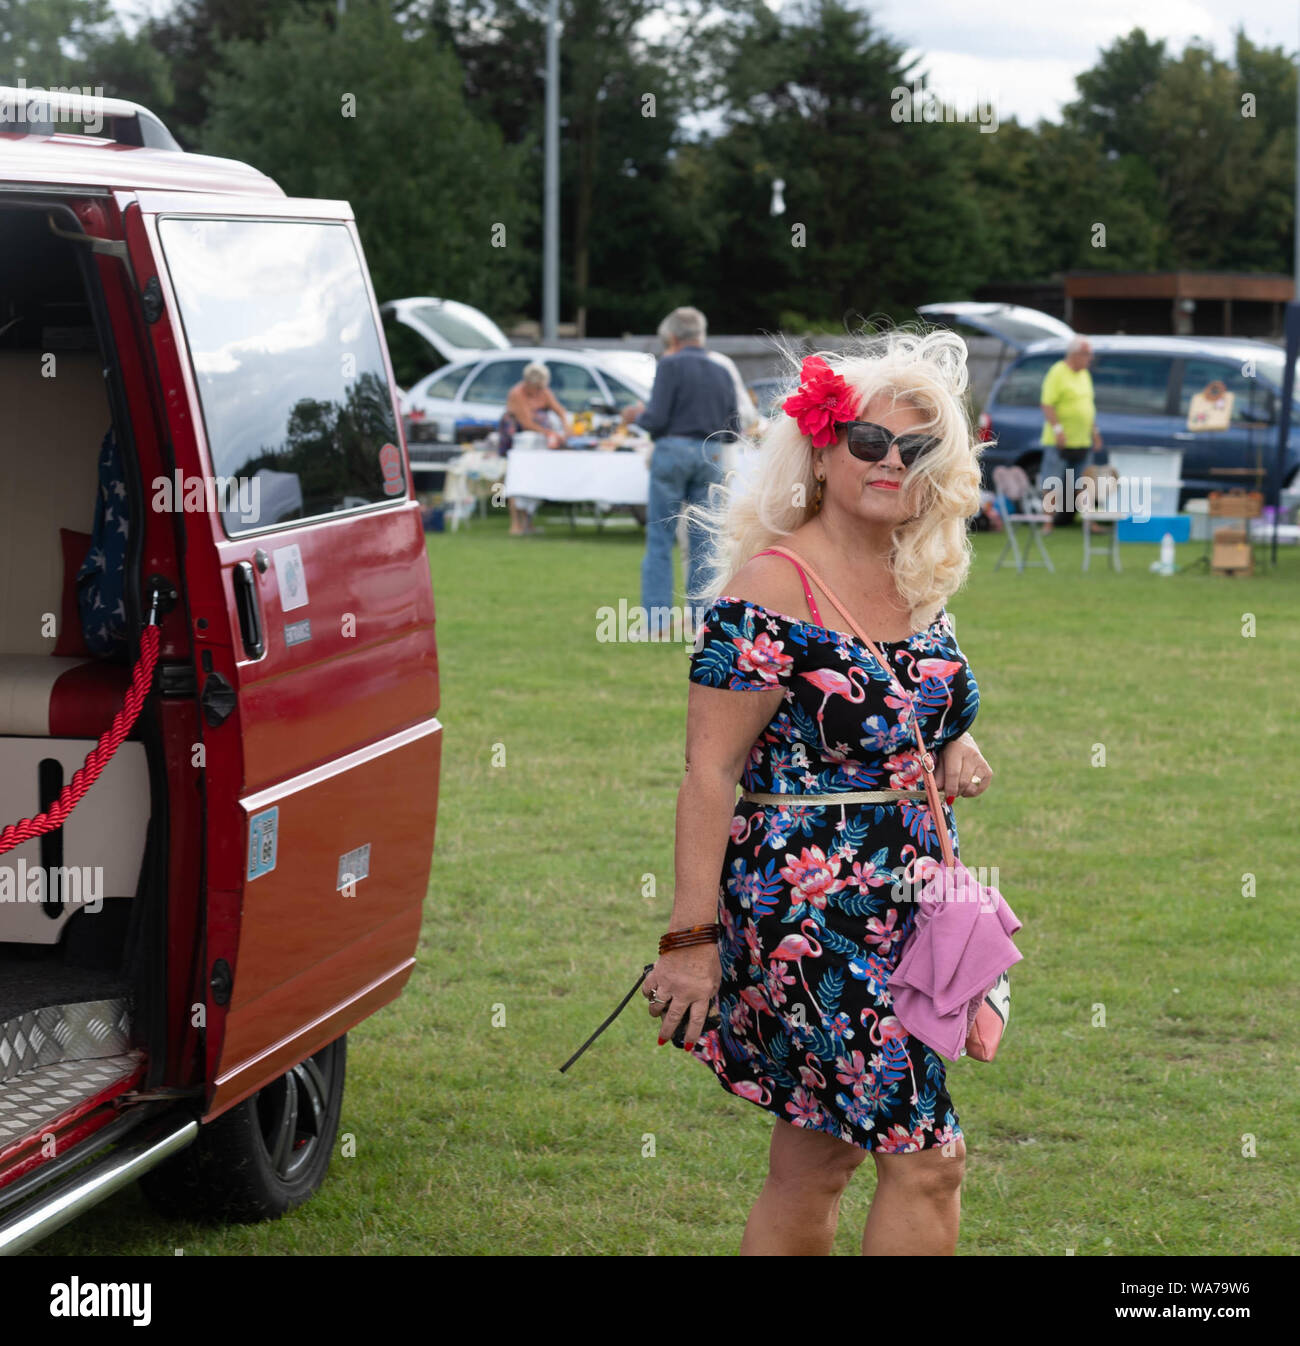 Brentwood Essex 18th August 2019 Essex Custom Culture Show, A CLASSIC CAR SHOW AND VINTAGE FAIR     A MID SUMMER CELEBRATION OF MID 20TH CENTURY CULTURE held at the Brentwood Center Brentwood Essex Credit Ian Davidson/Alamy Live News Stock Photo